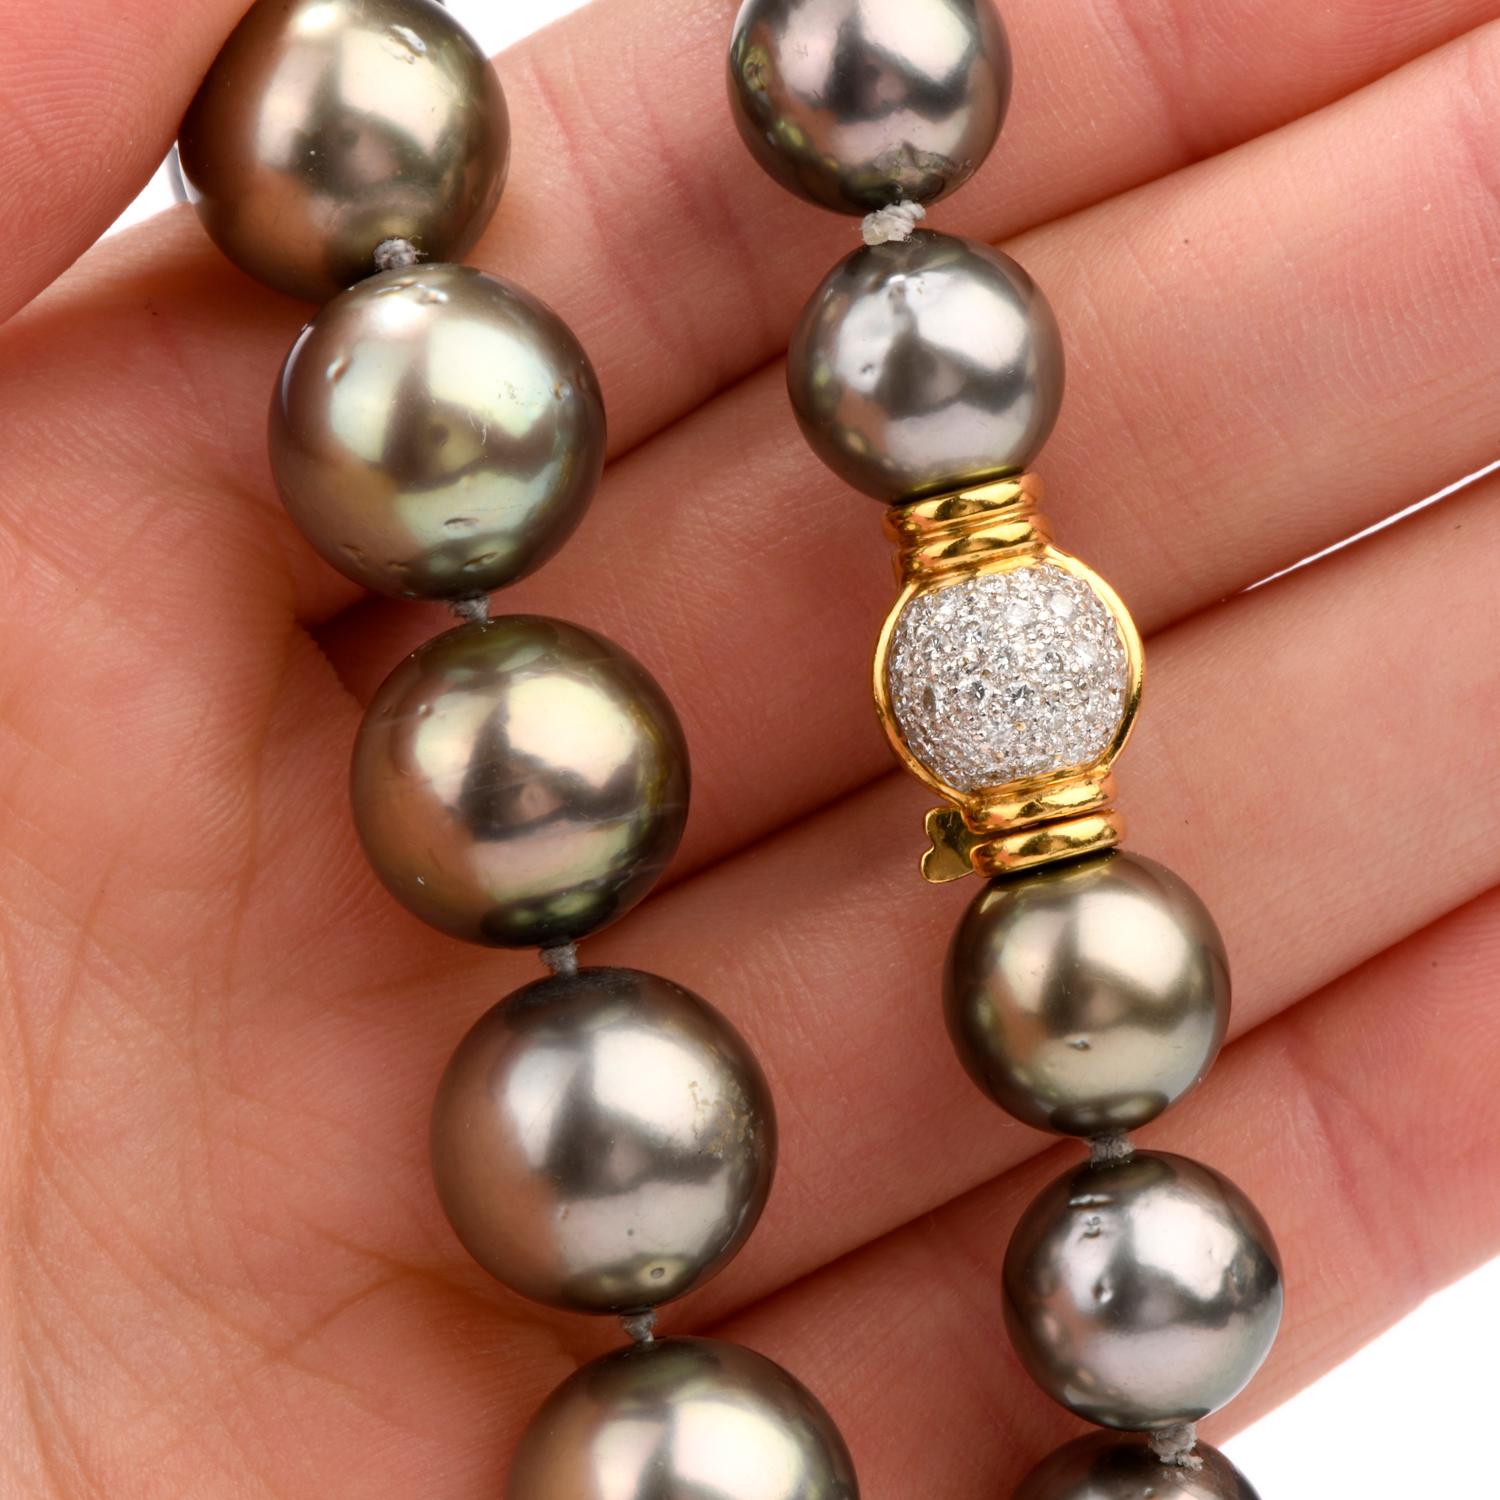 Classic and Elegant

This 20 Inch strand of genuine lustrous Tahitian Pearls tapers from 11 to 16mm.

Featured are 37 large Pearls and a diamond encrusted 18k gold ball clasp

all strung and knotted between.

Diamonds weigh appx. .90 carats and are